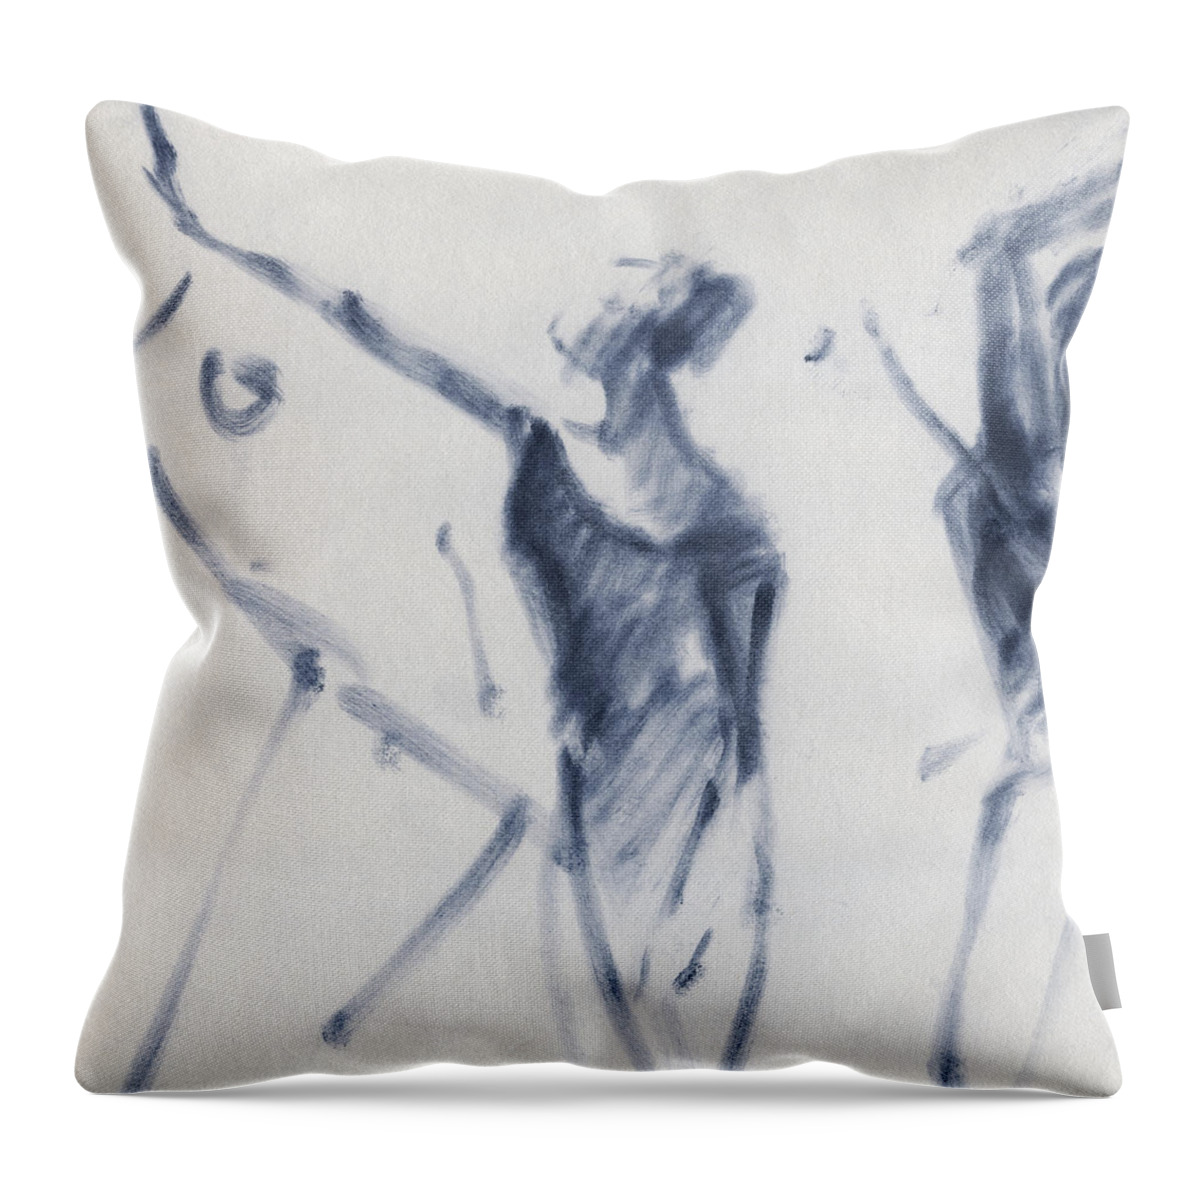 Ballet Throw Pillow featuring the drawing Ballet Sketch Arm Reaching Out by Beverly Brown